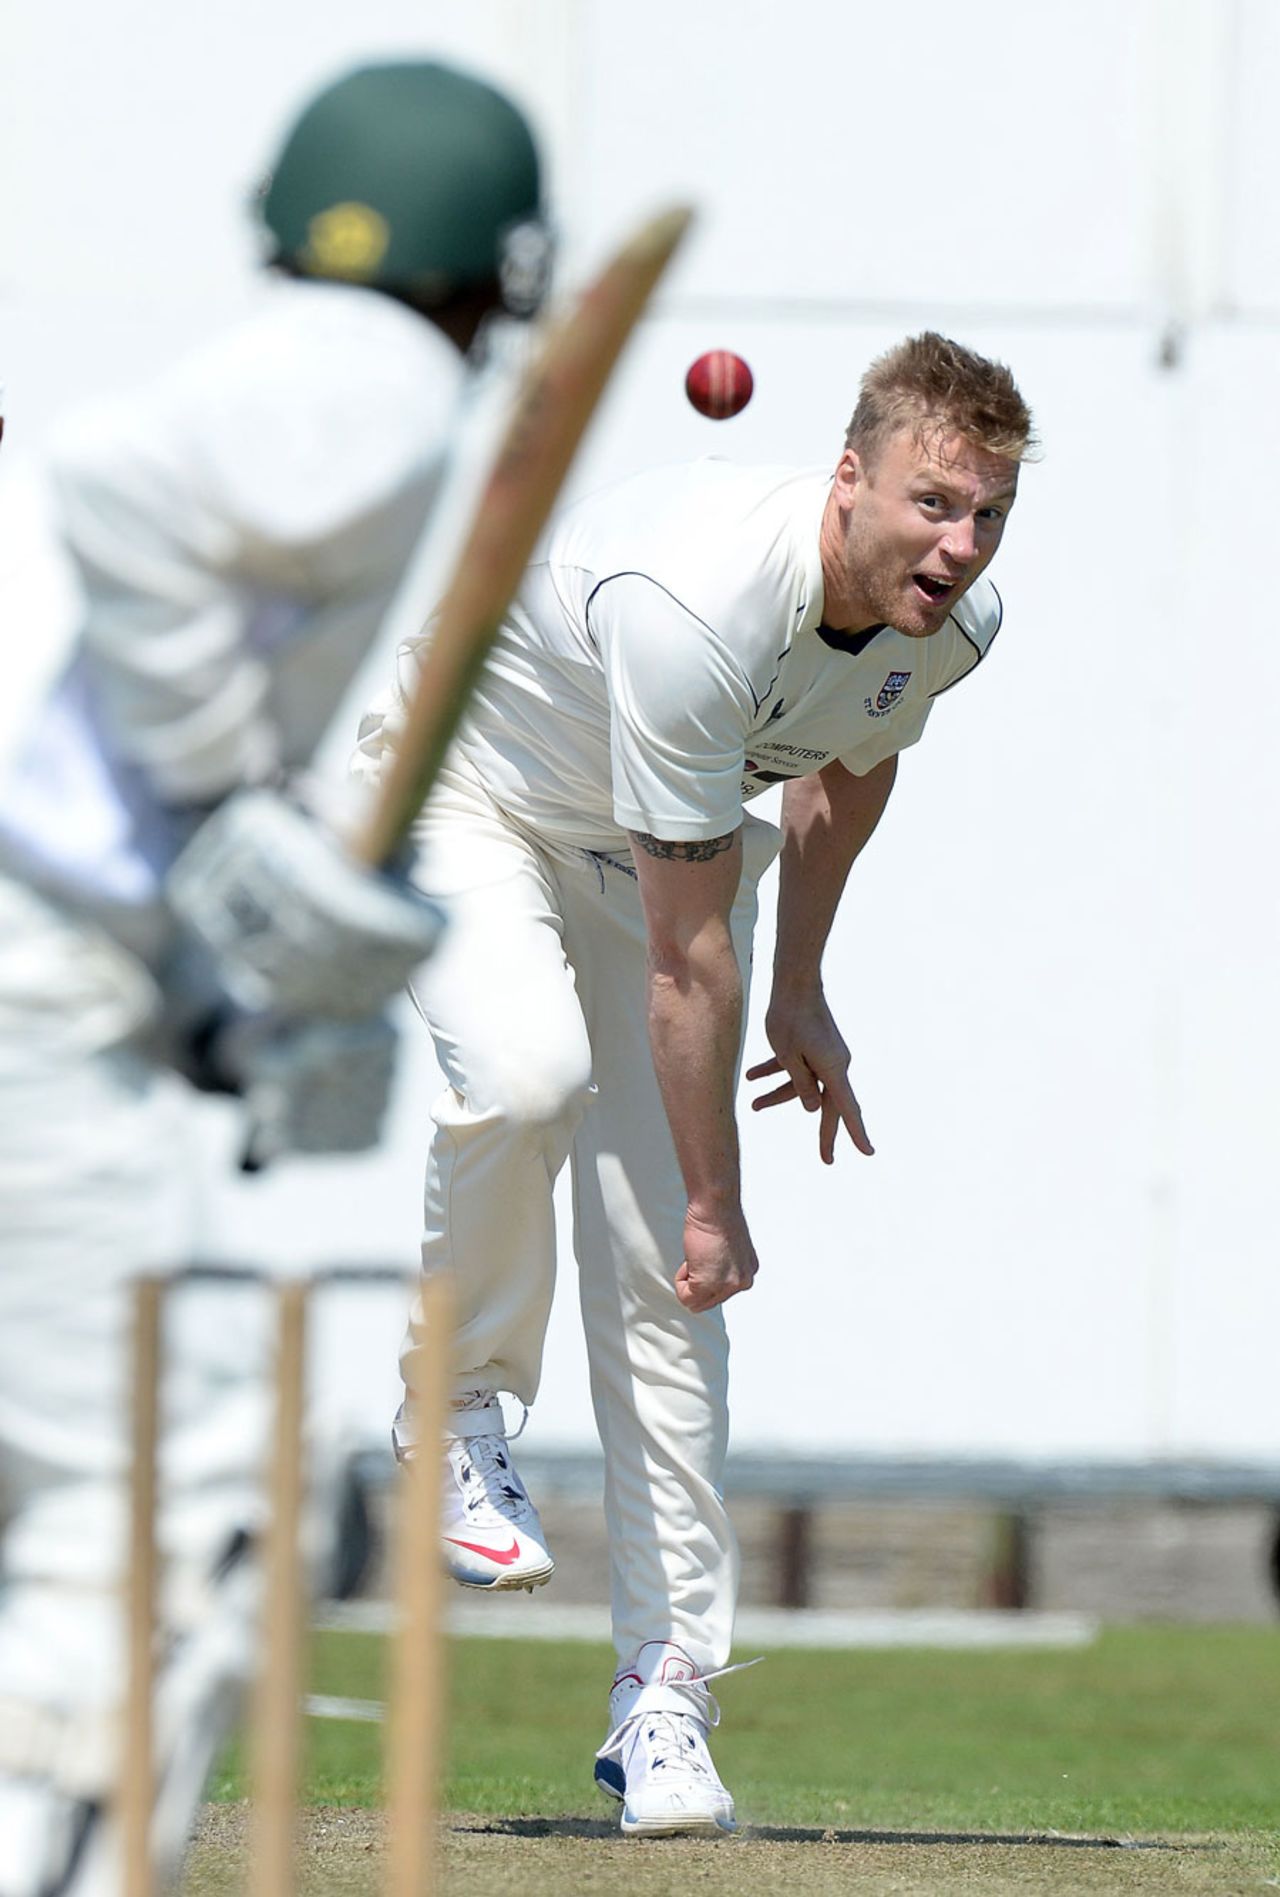 Look who's back... Andrew Flintoff bowling for St Annes on his return, May 31, 2014